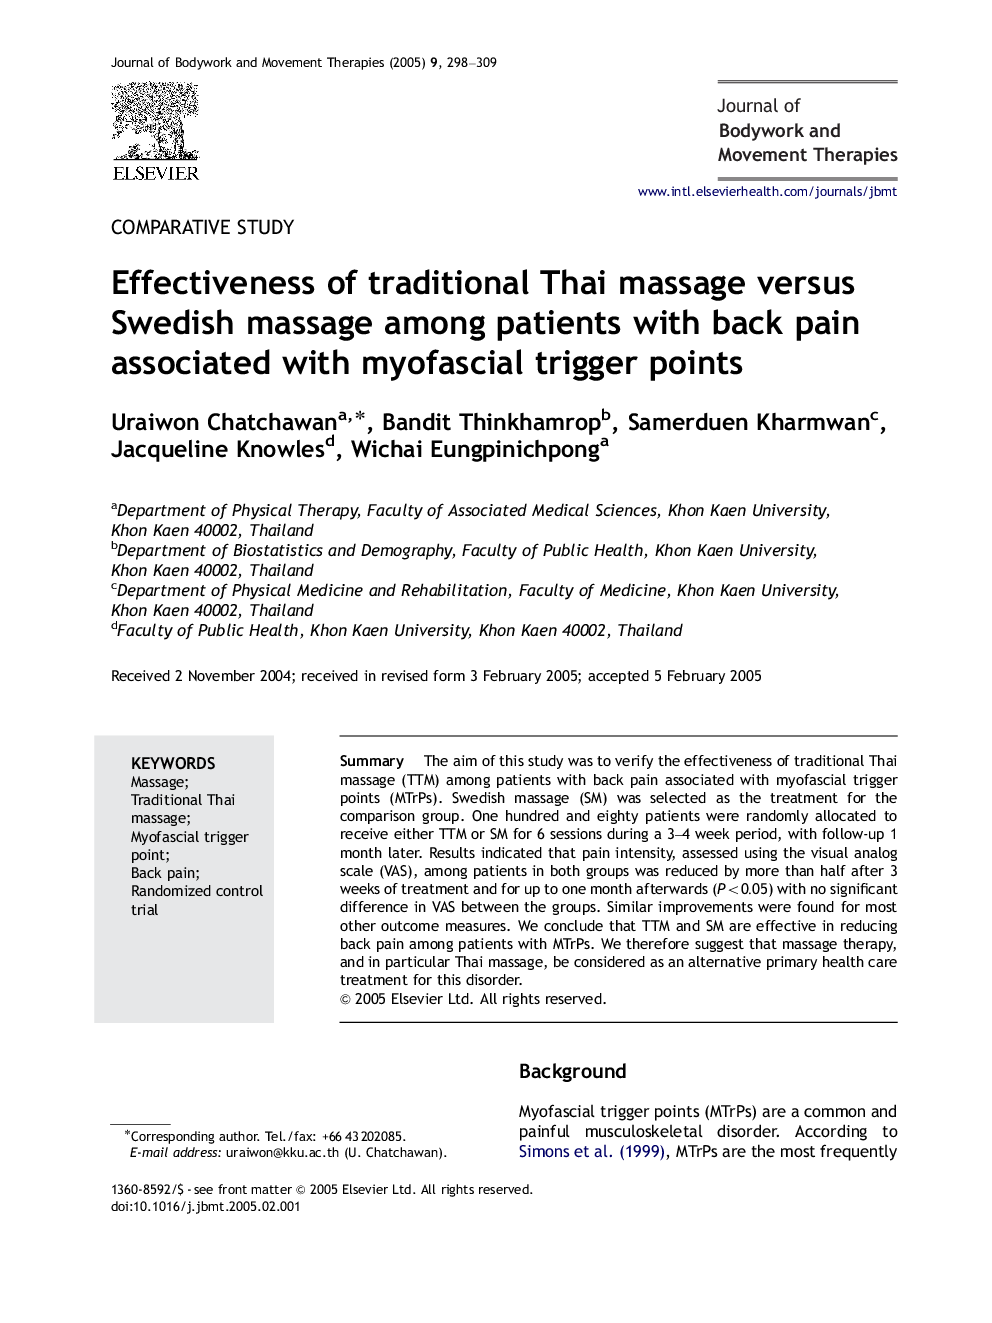 Effectiveness of traditional Thai massage versus Swedish massage among patients with back pain associated with myofascial trigger points